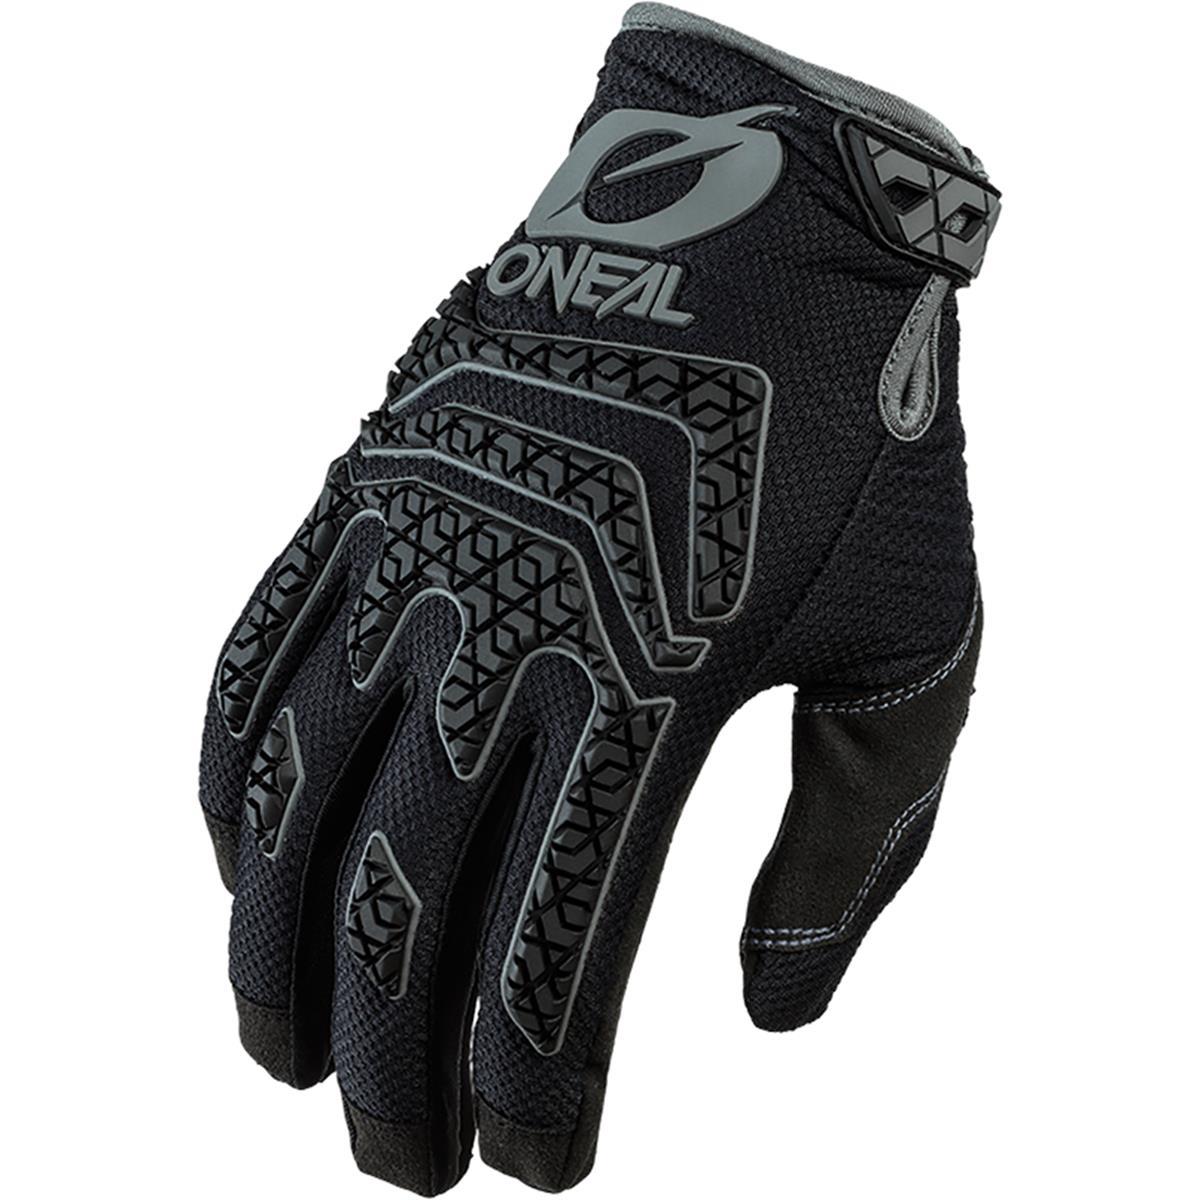 Black/Gray, 10 ONeal Mens Glove 